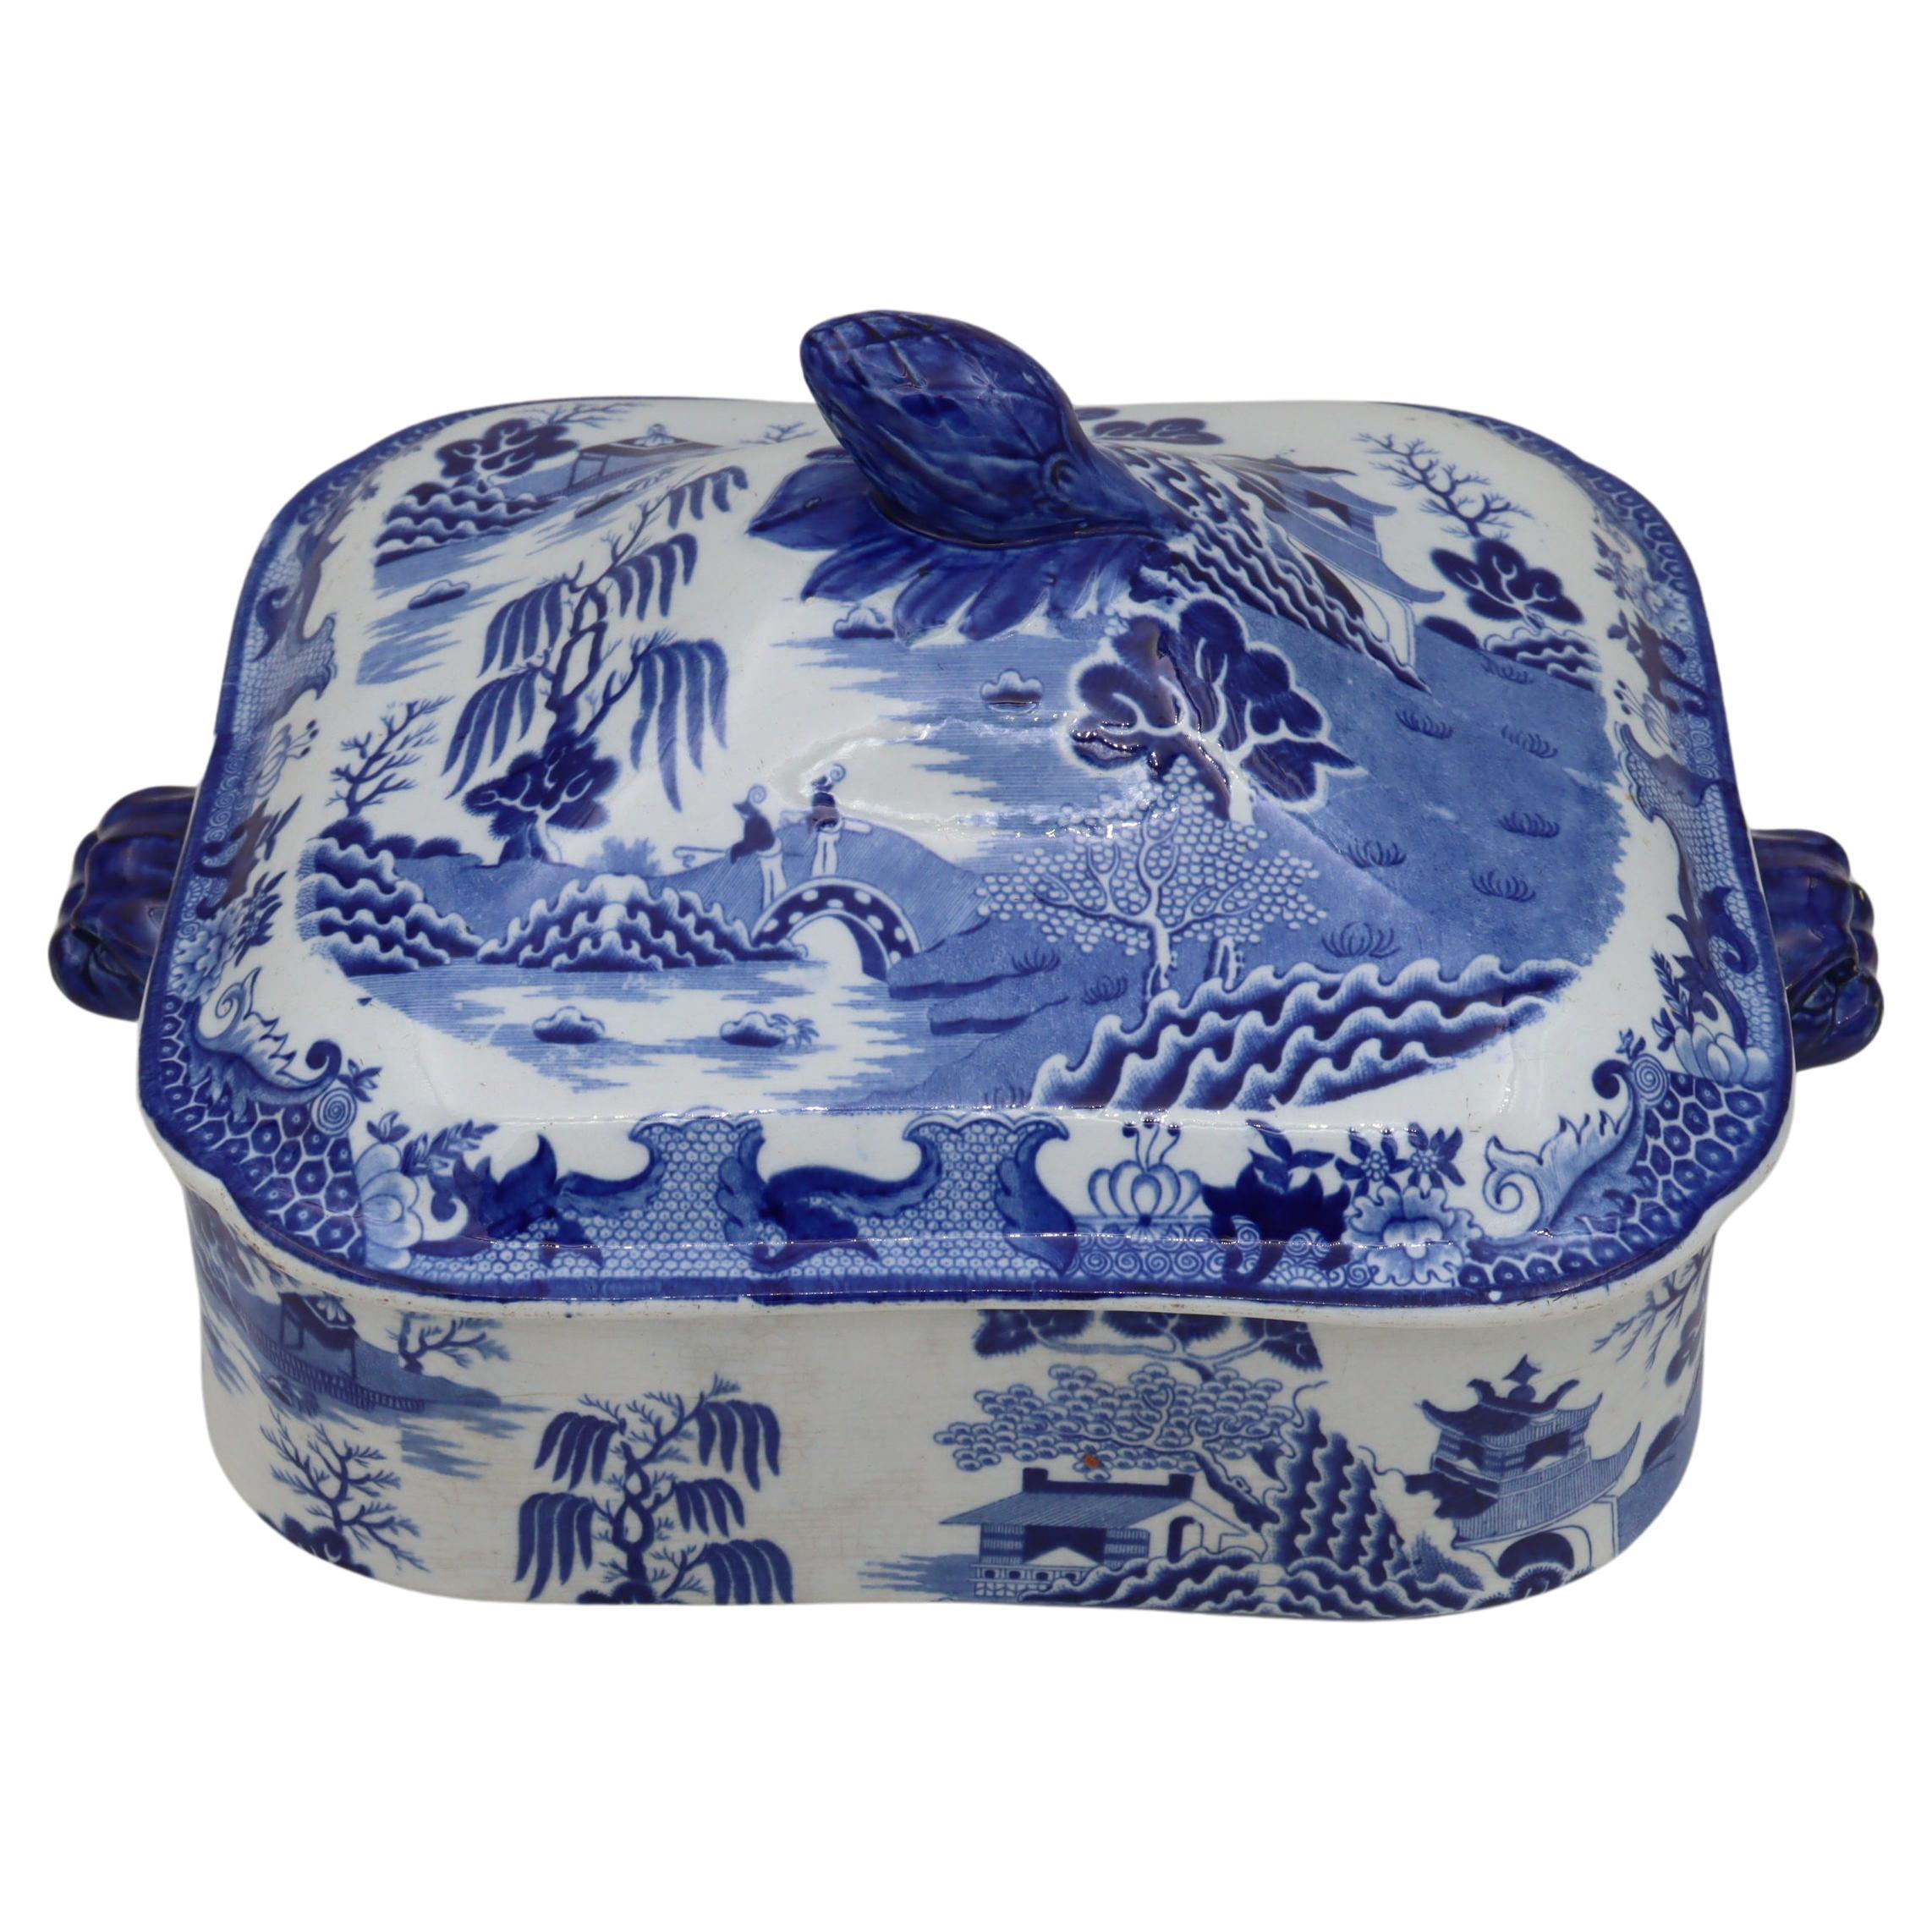 Blue and white tureen att. to Turner's of Lane End